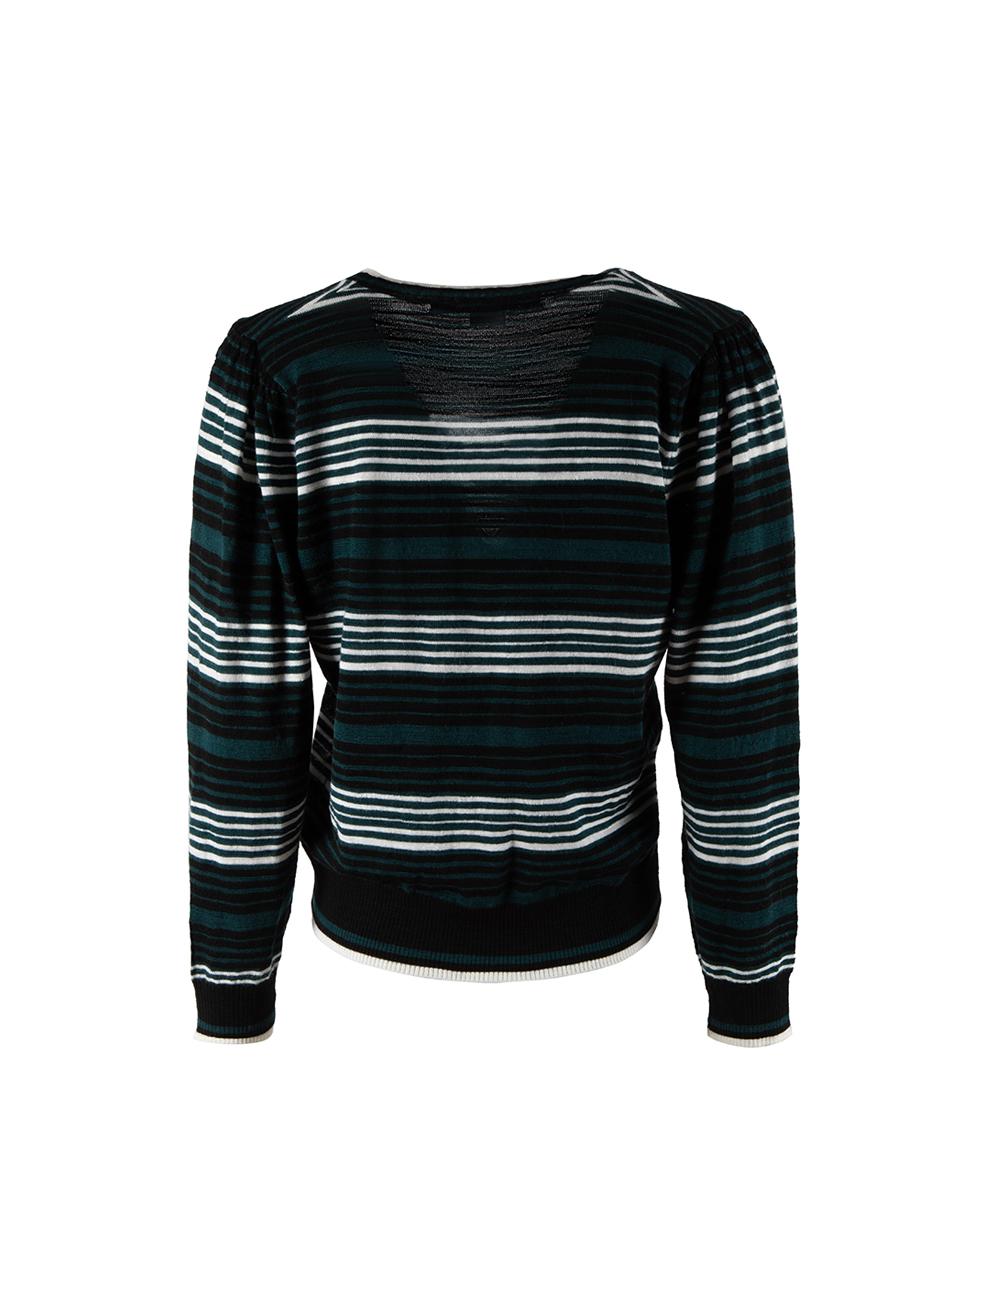 Black Veronica Beard Green Wool Striped Knitted Jumper Size M For Sale